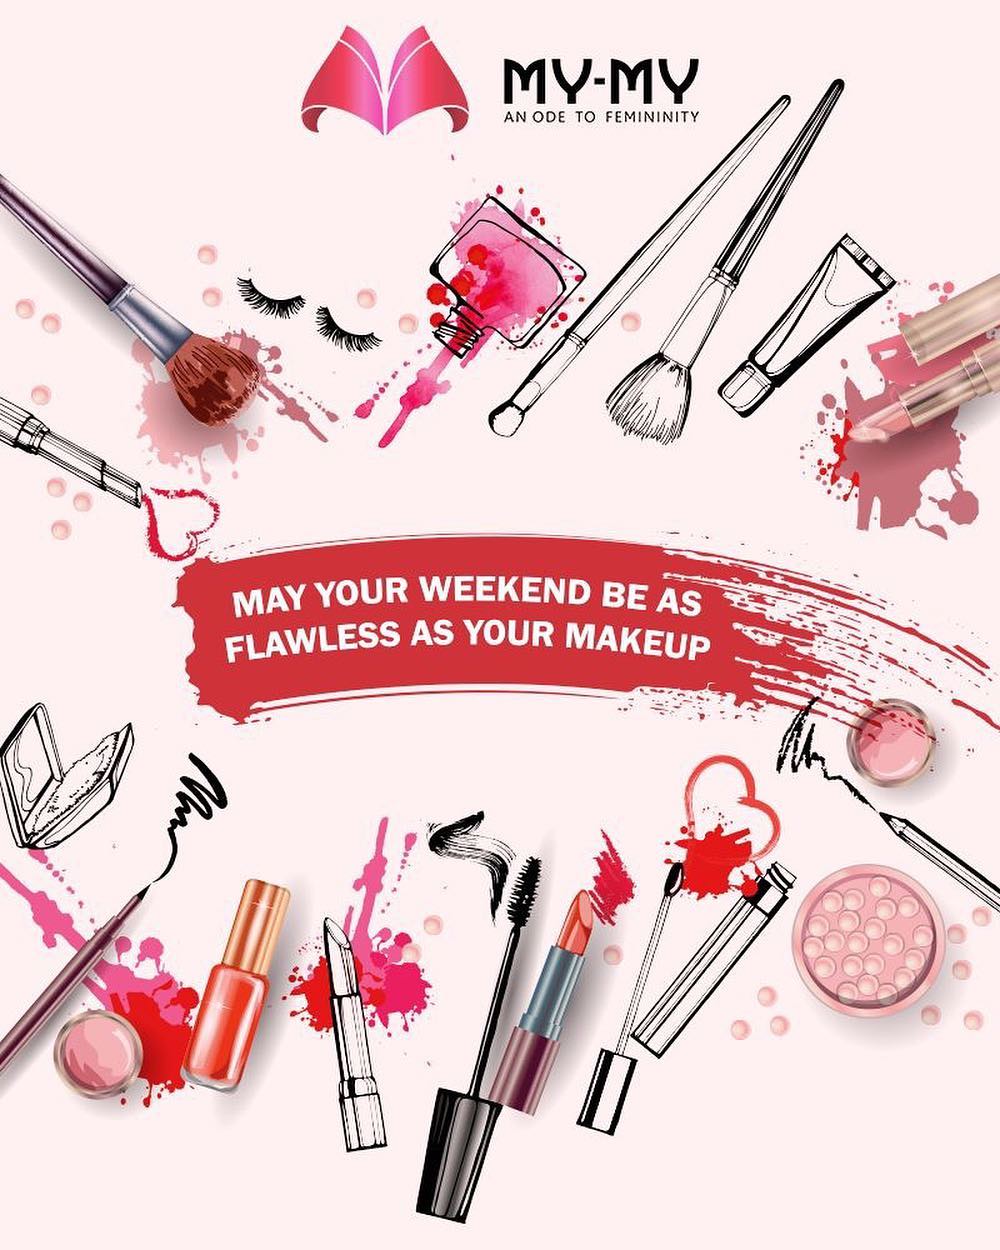 Rock your #Weekend with gorgeousness! 
#MyMy #MyMyAhmedabad #Fashion #Ahmedabad #SummerColors #Cosmetics